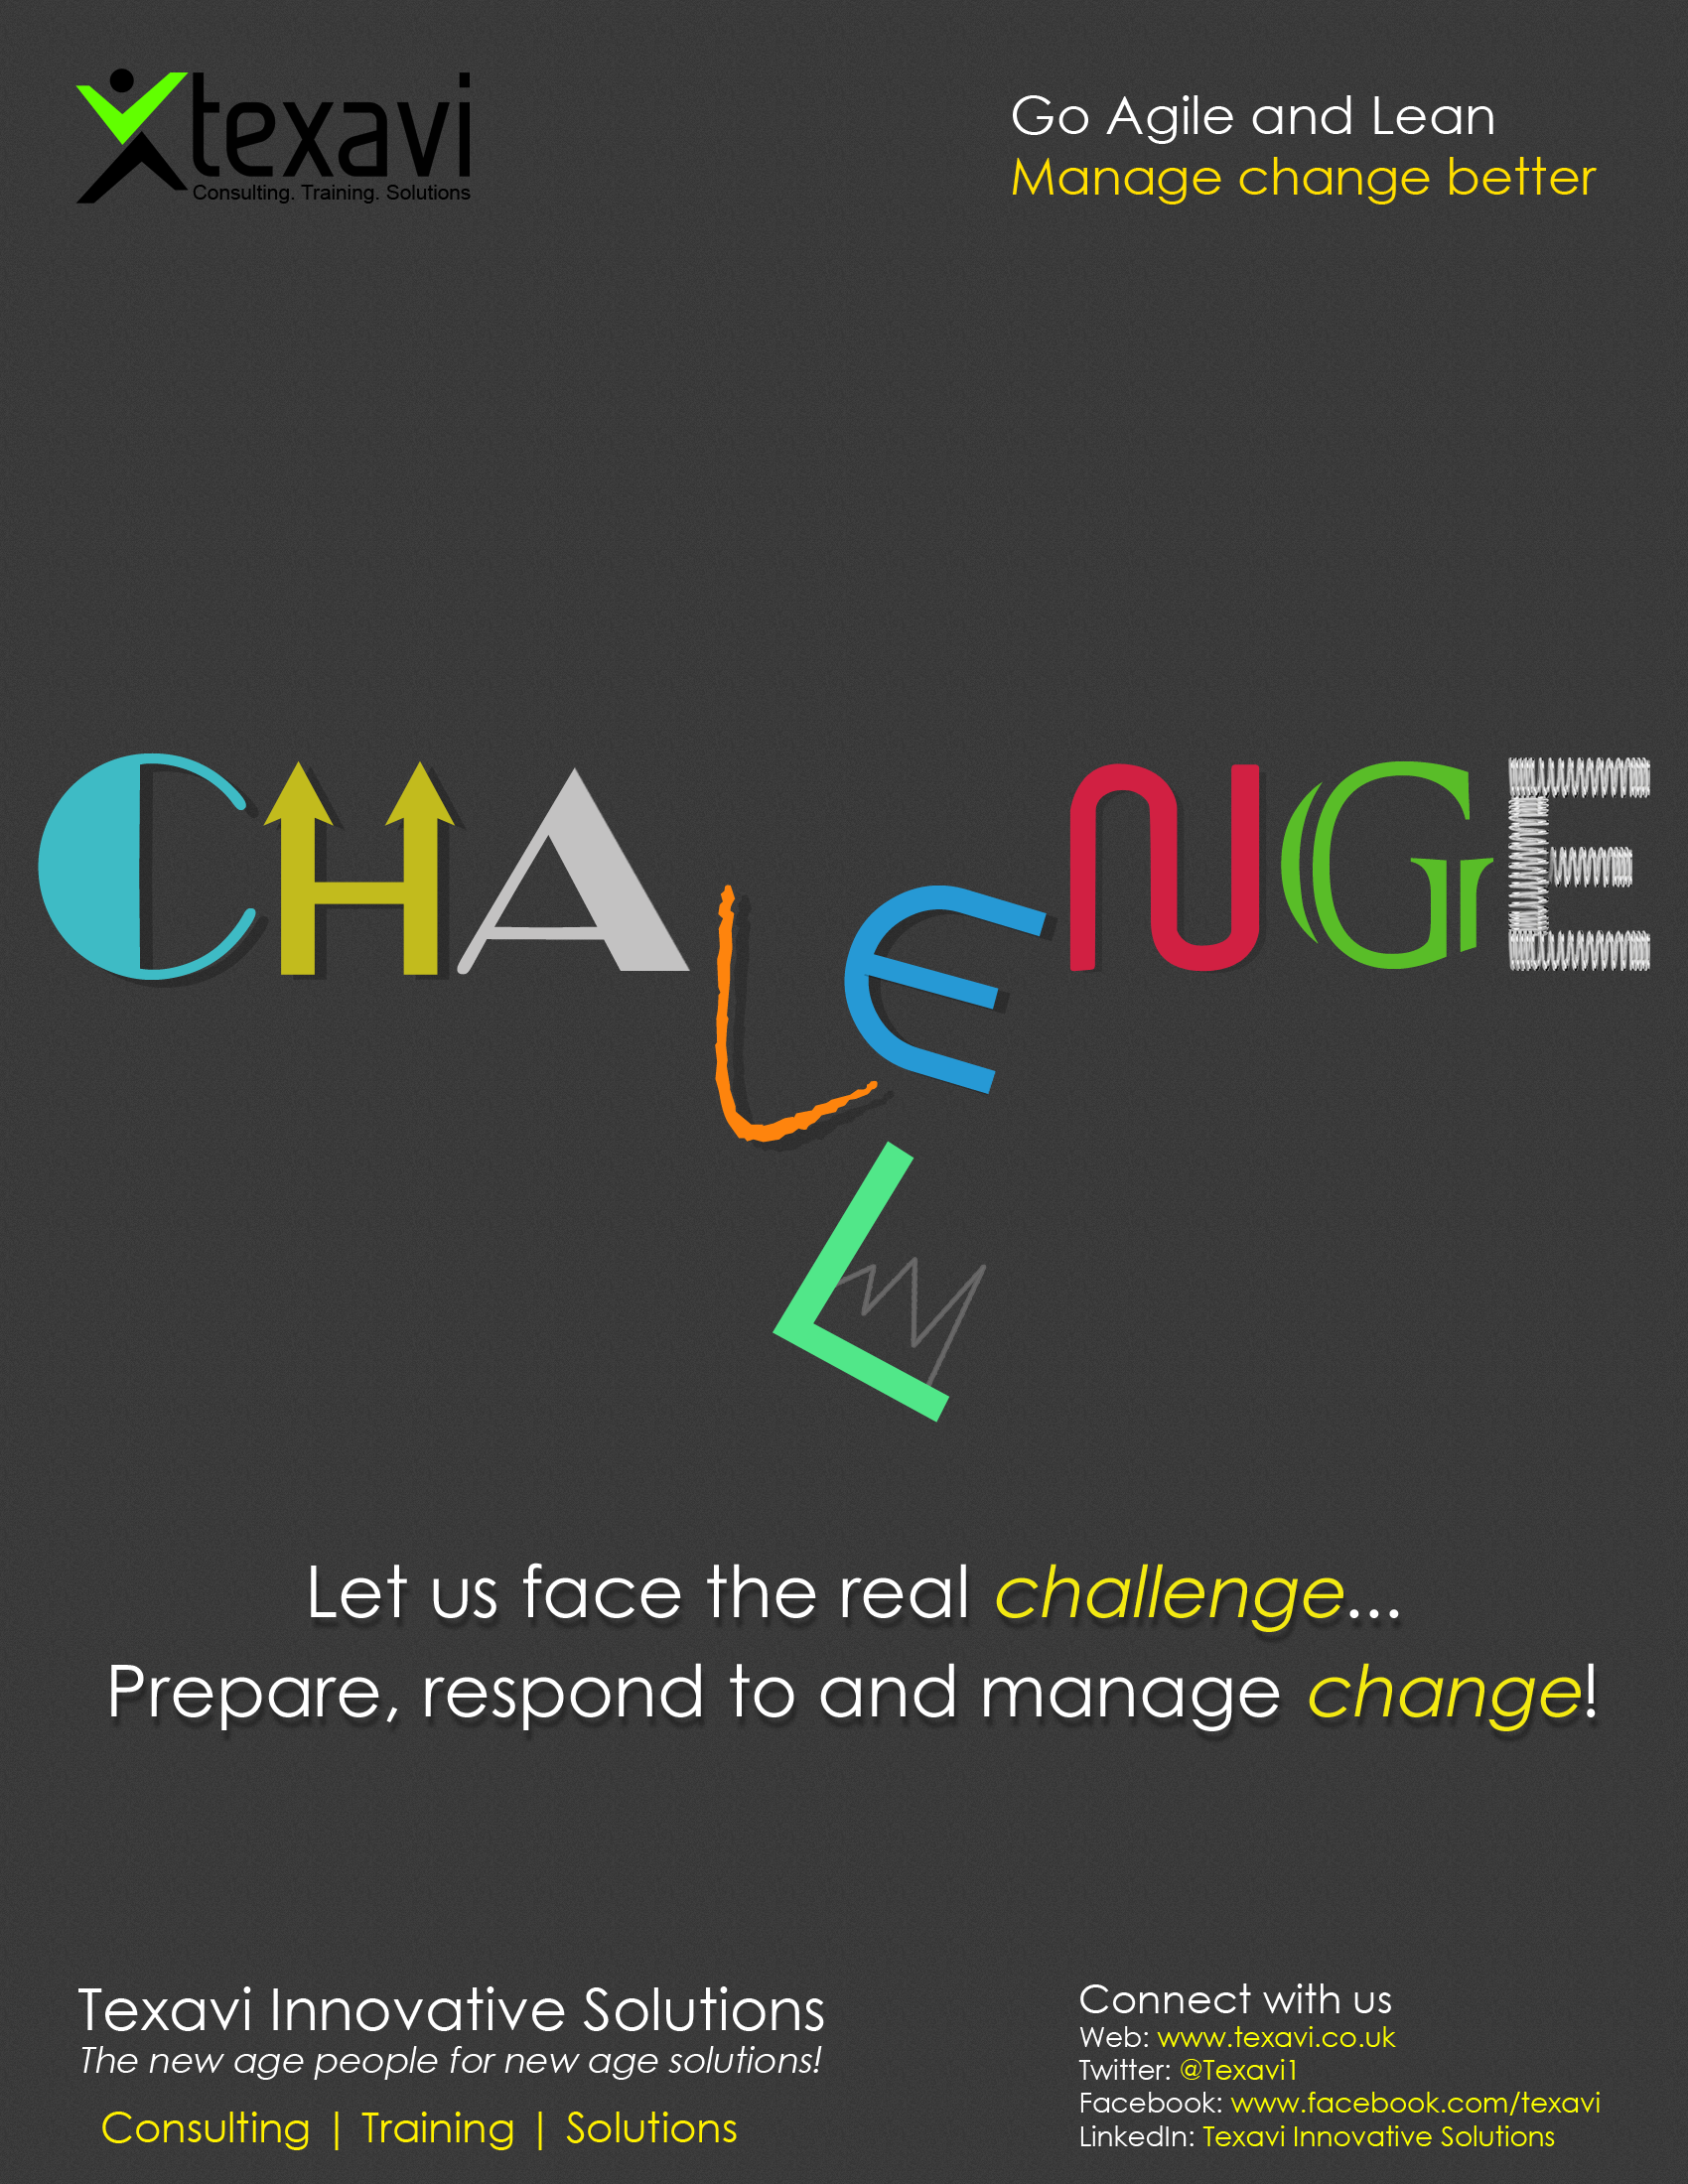 Go Agile and Lean - Manage change better